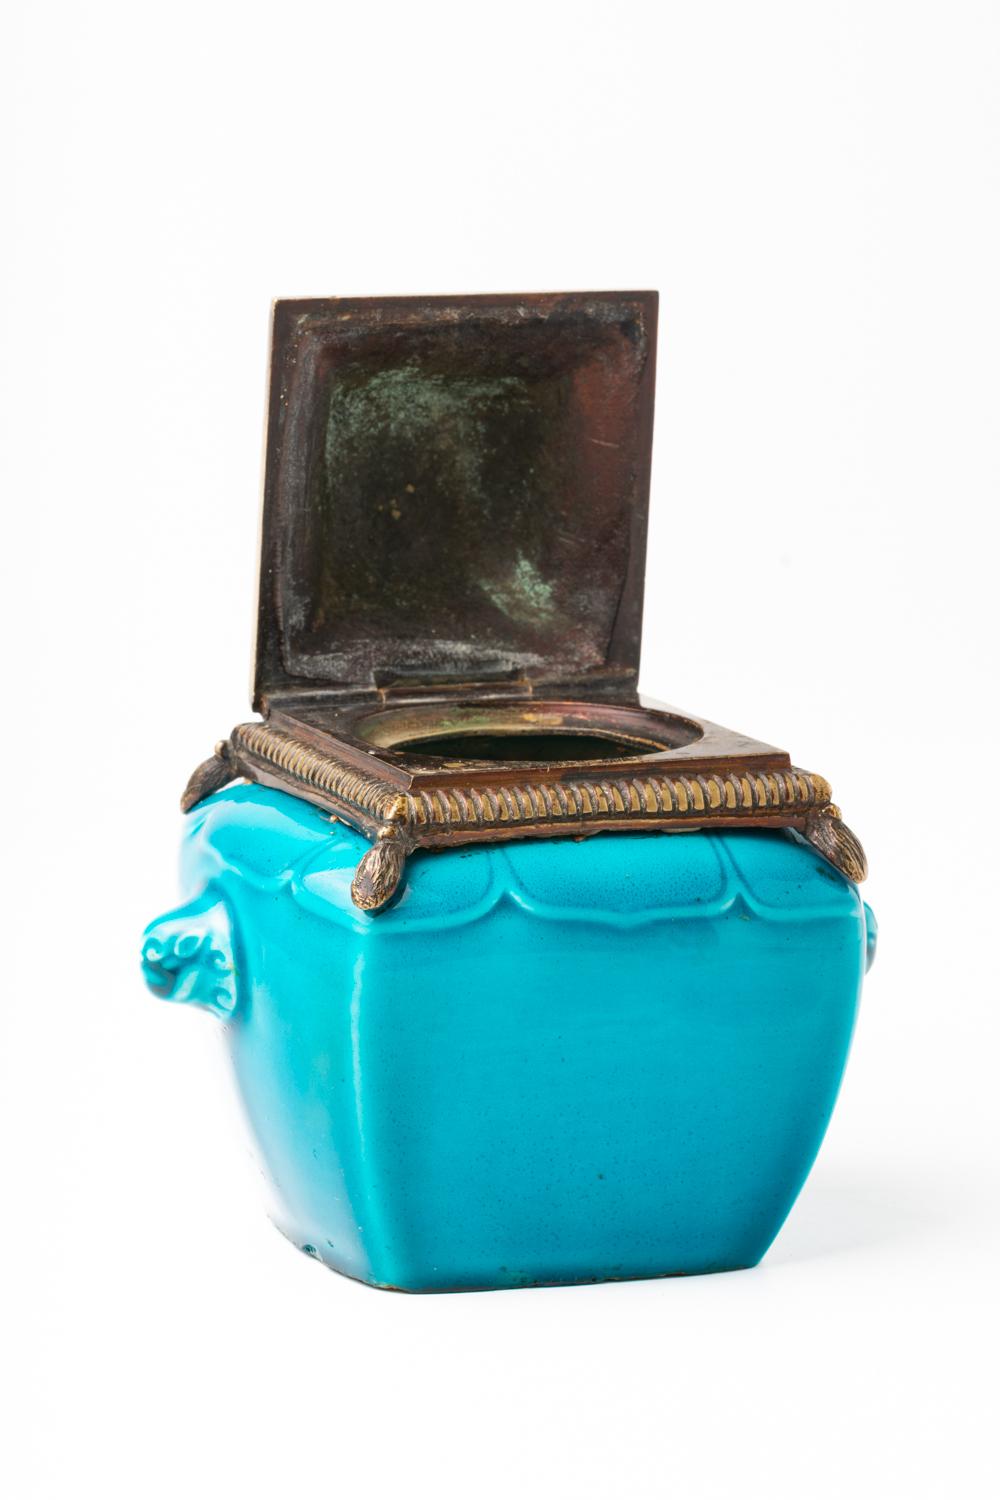 A 19th century Blue And Bronze Inkwell By Théodore Deck For Sale 1